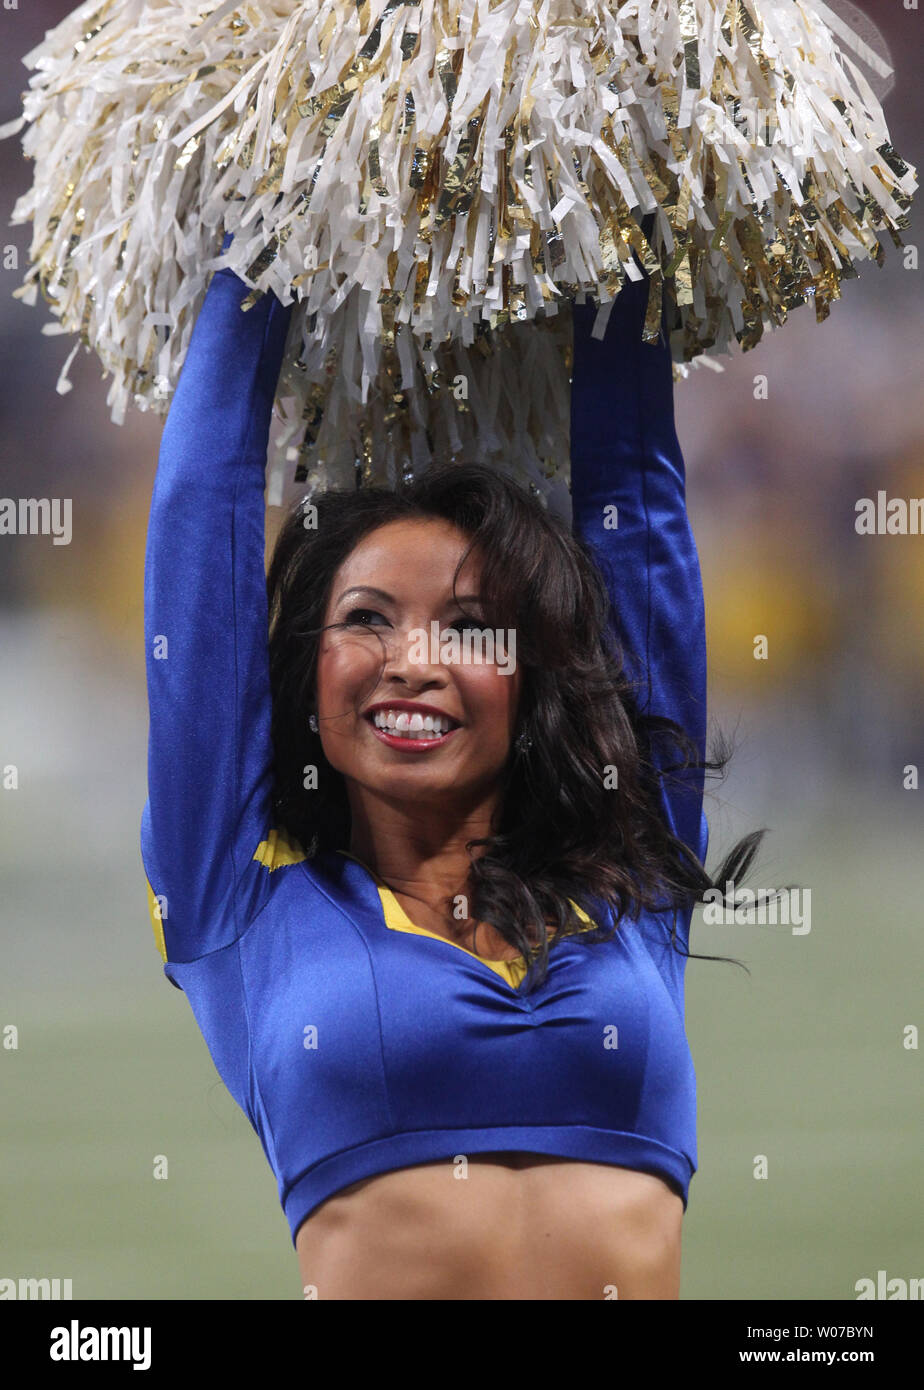 A St. Louis Rams cheerleader entertains the crowd during the fourth quarter against the Tampa Bay Buccaneers at the Edward Jones Dome in St. Louis on December 22, 2013.   UPI/Bill Greenblatt Stock Photo